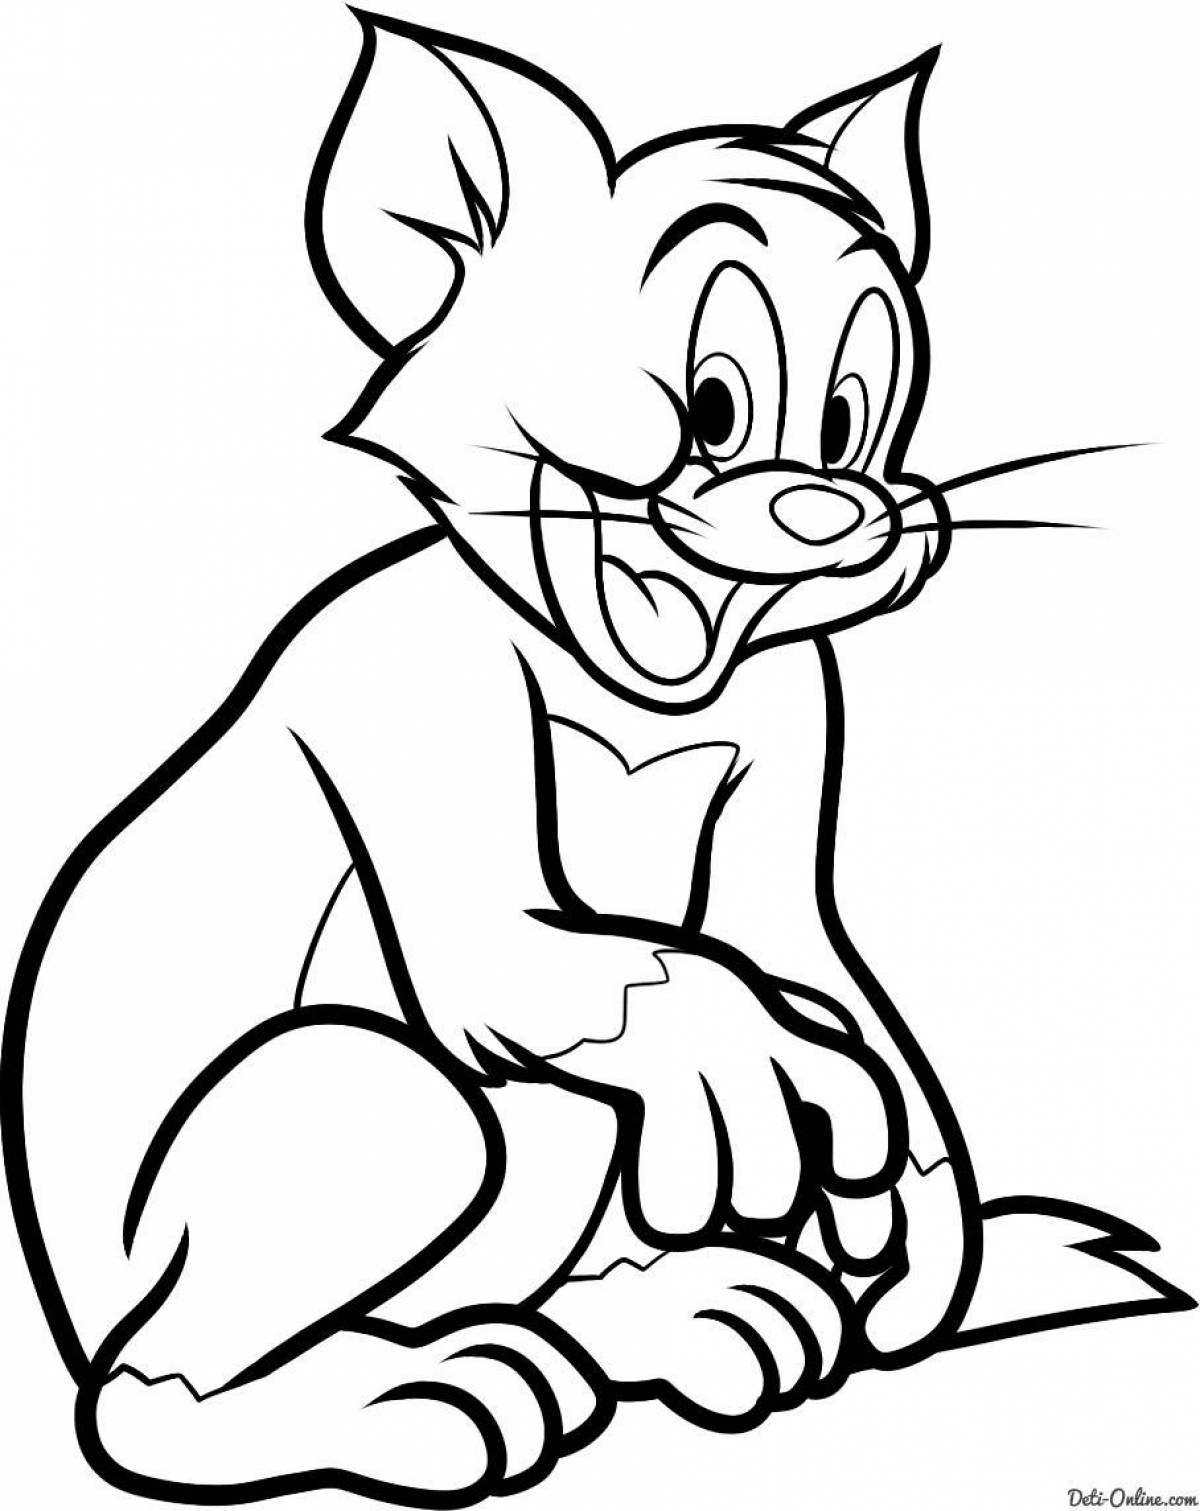 Attractive tom cat coloring page